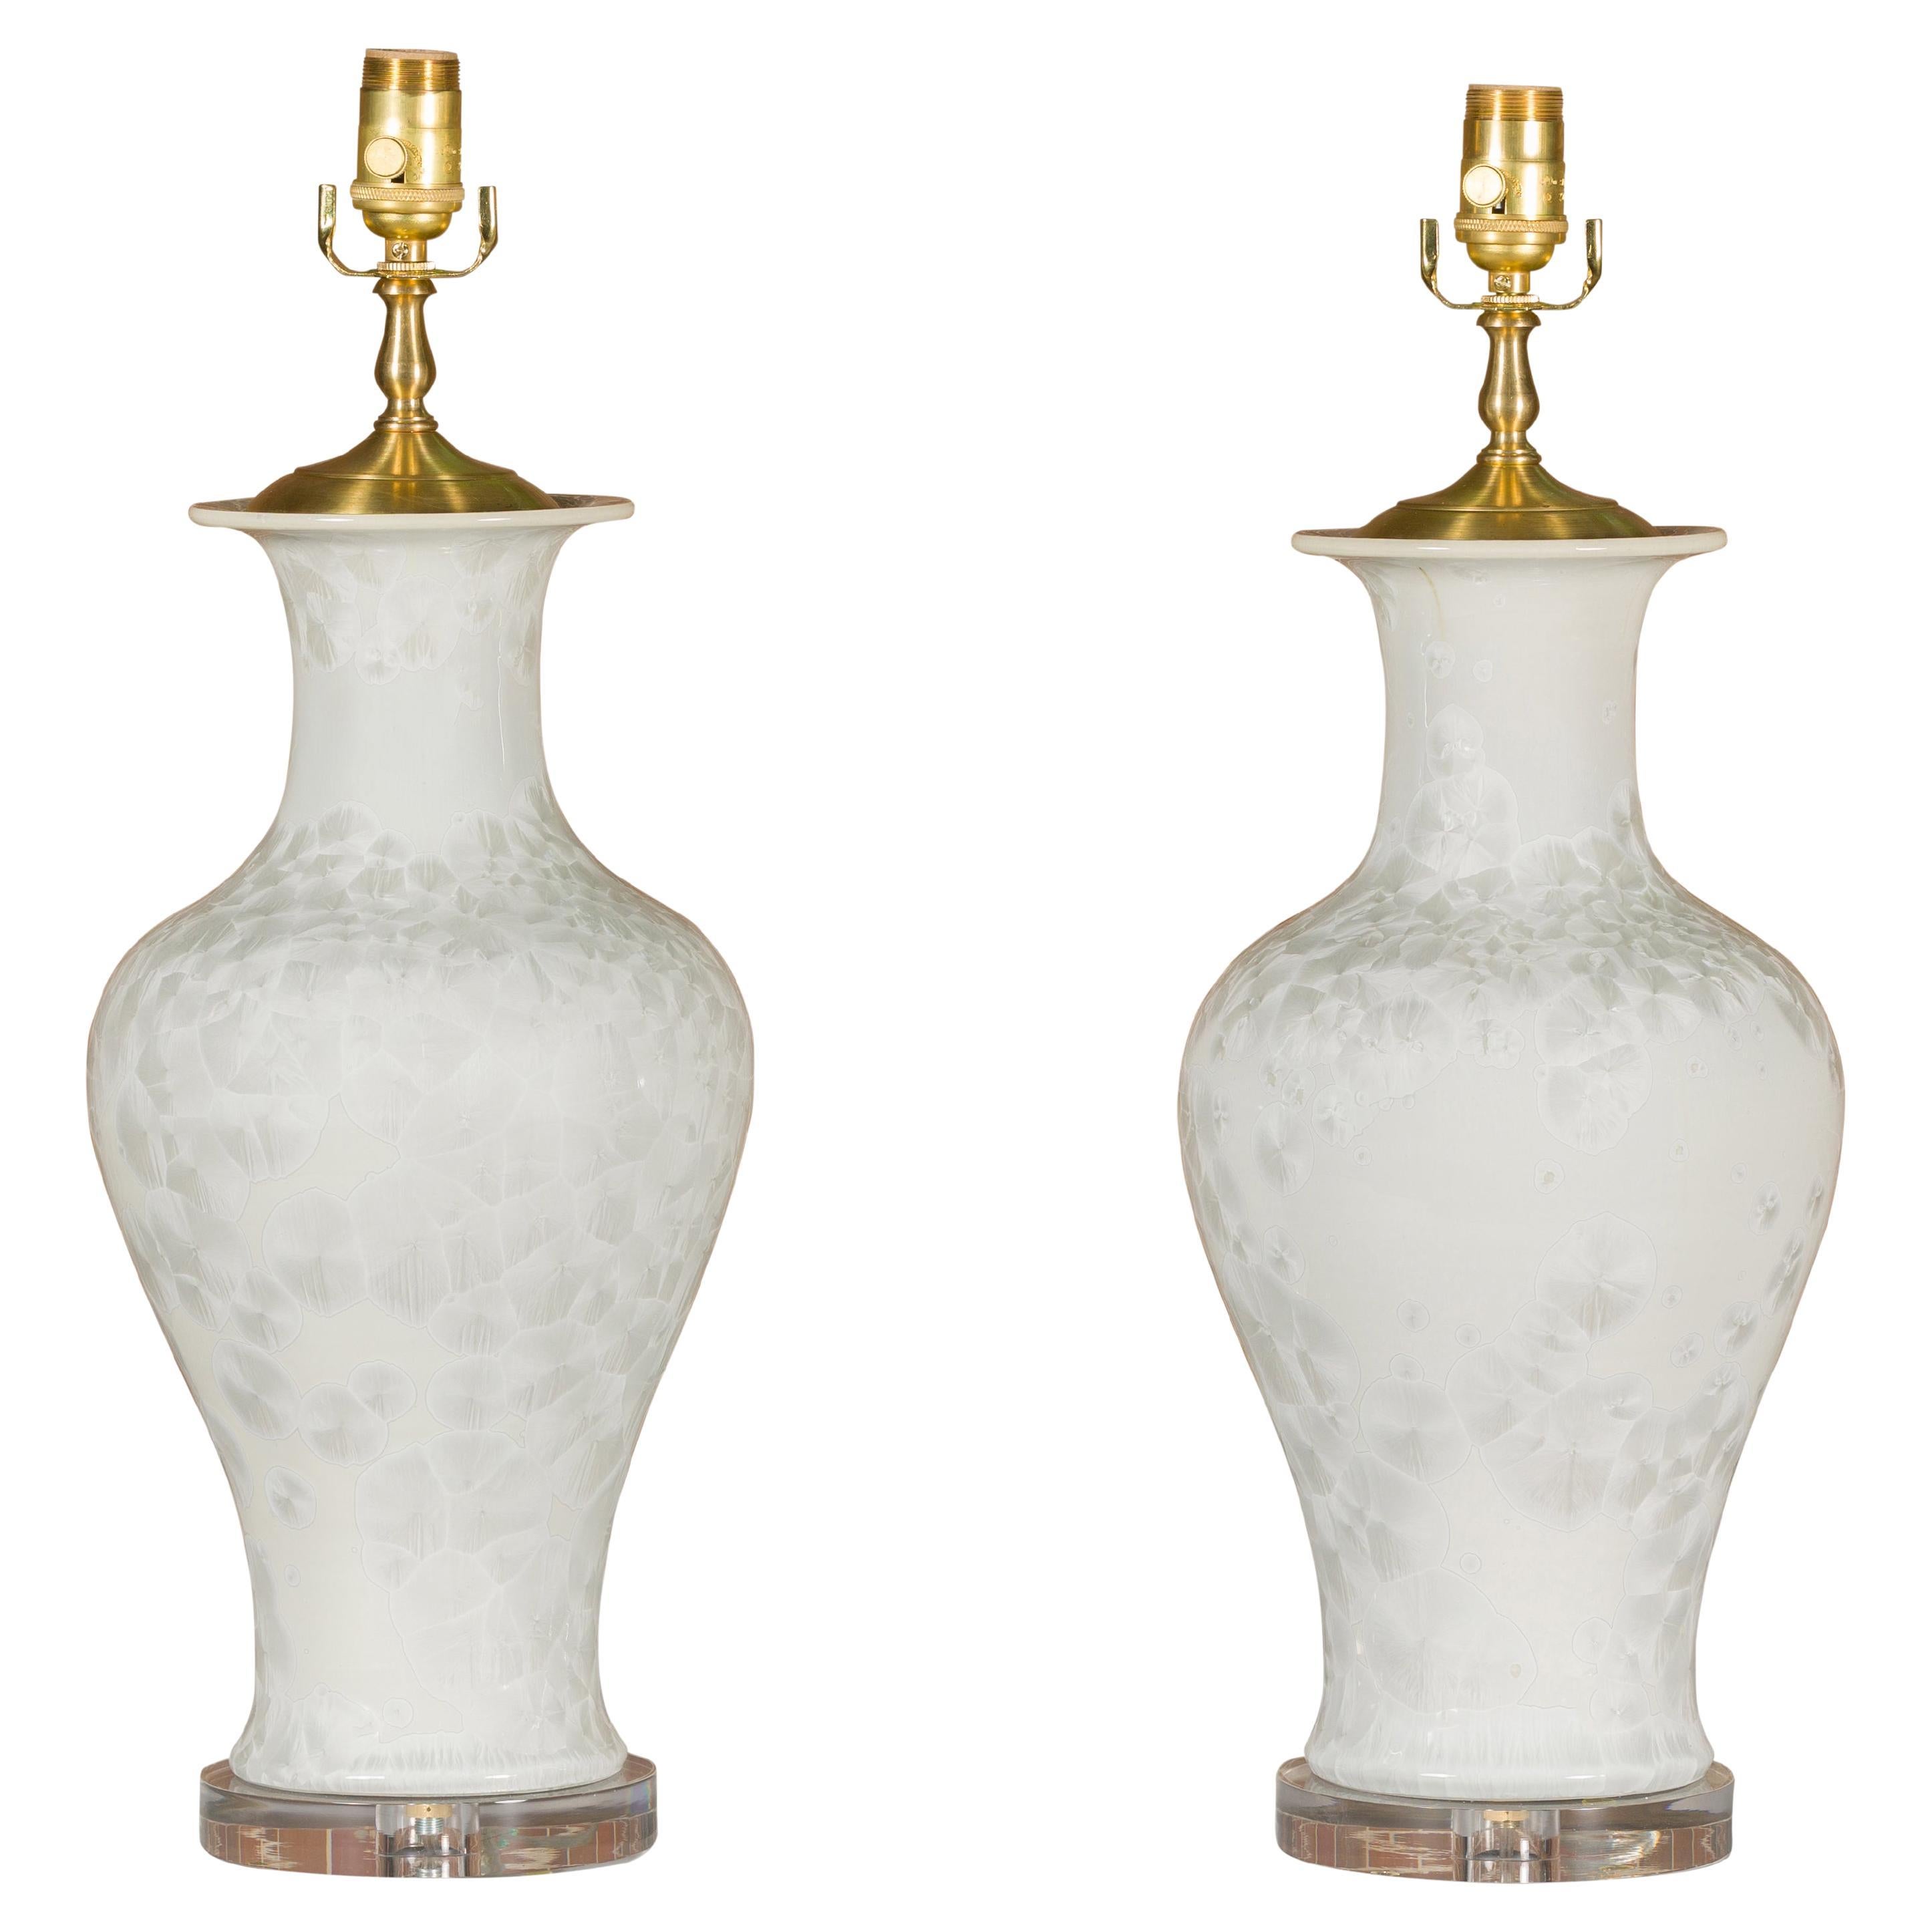 Pair of White Porcelain Vase Table Lamps on Lucite Bases with Textured Décor For Sale